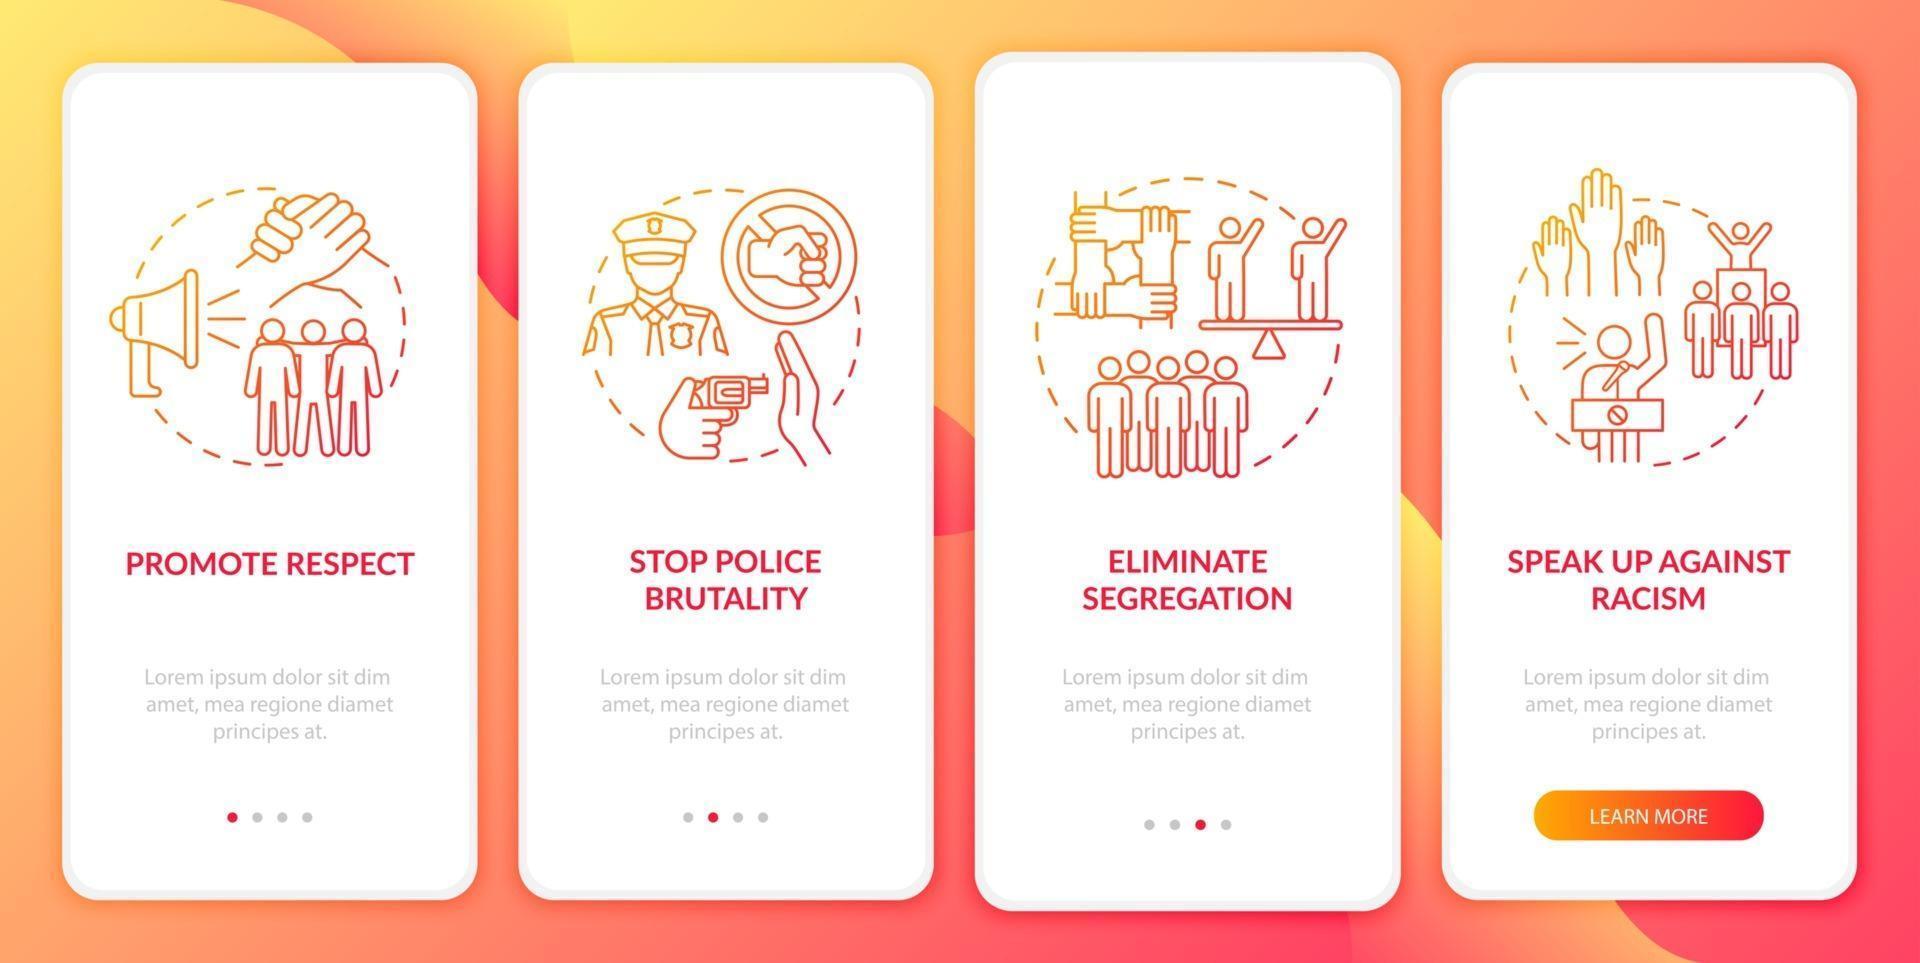 Denouncing racism onboarding mobile app page screen. Activism against injustice walkthrough 4 steps graphic instructions with concepts. UI, UX, GUI vector template with linear color illustrations